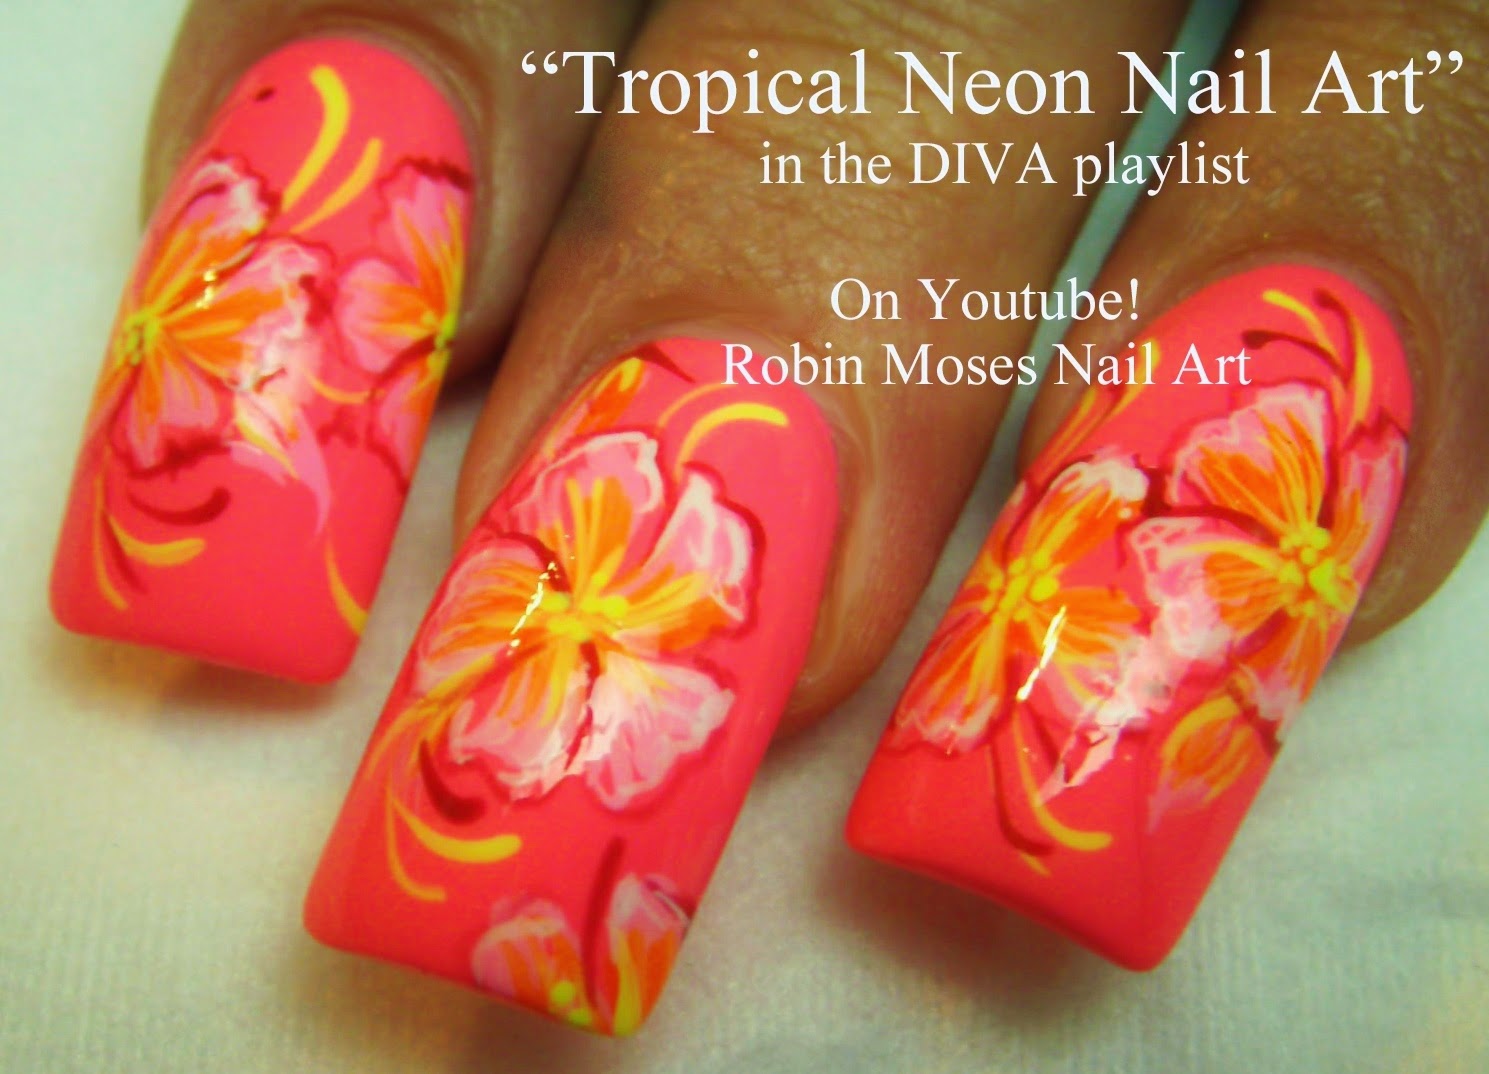 2. "Nail Art Tutorial Compilation" on Dailymotion - wide 6